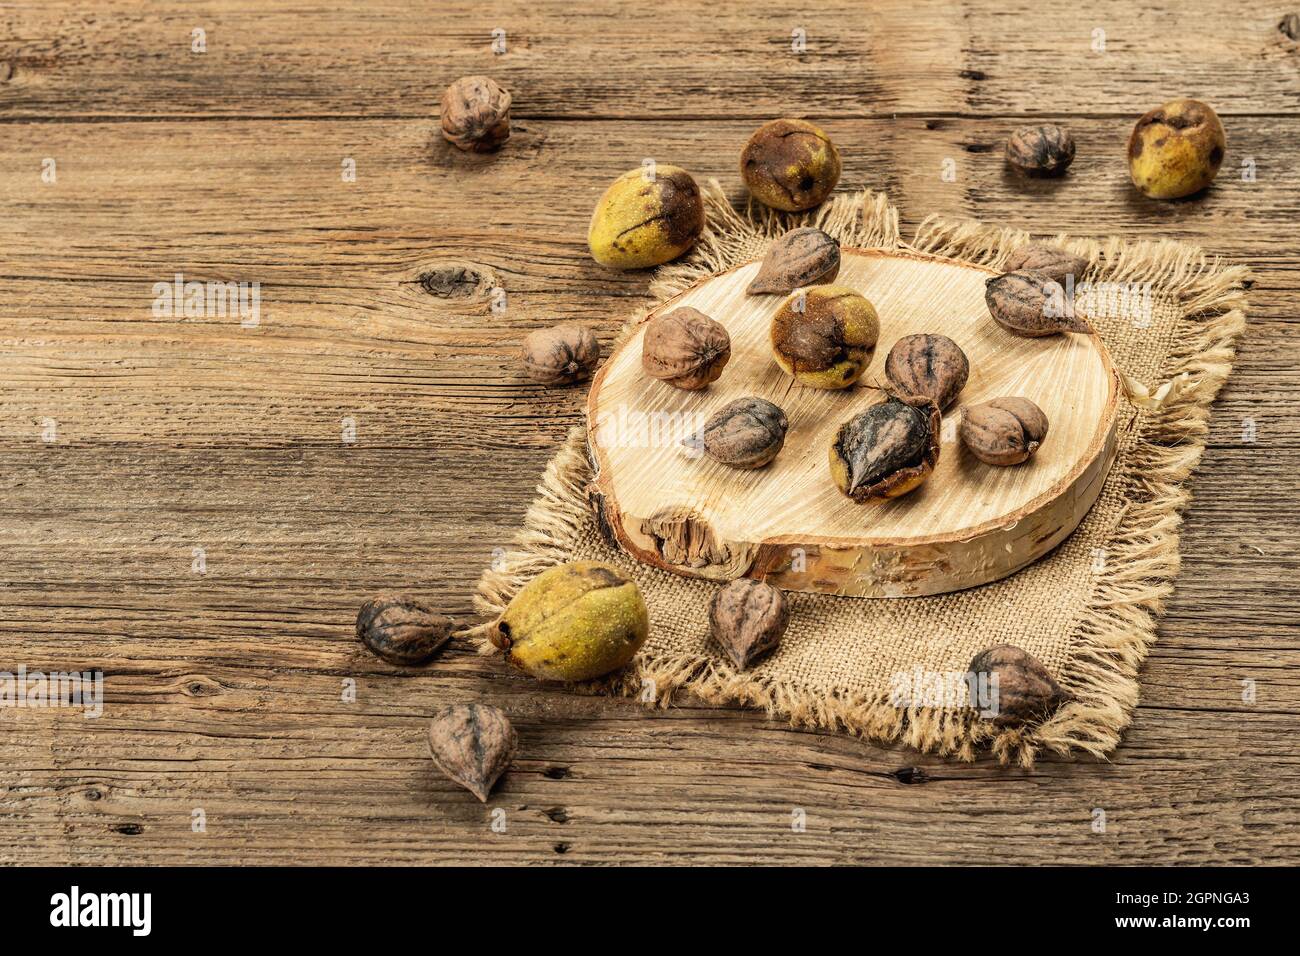 Ripe Juglans cordiformis Maxim or heart-shaped walnut. Young green and unpeeled whole nuts on a stand. Vintage wooden boards background, copy space Stock Photo